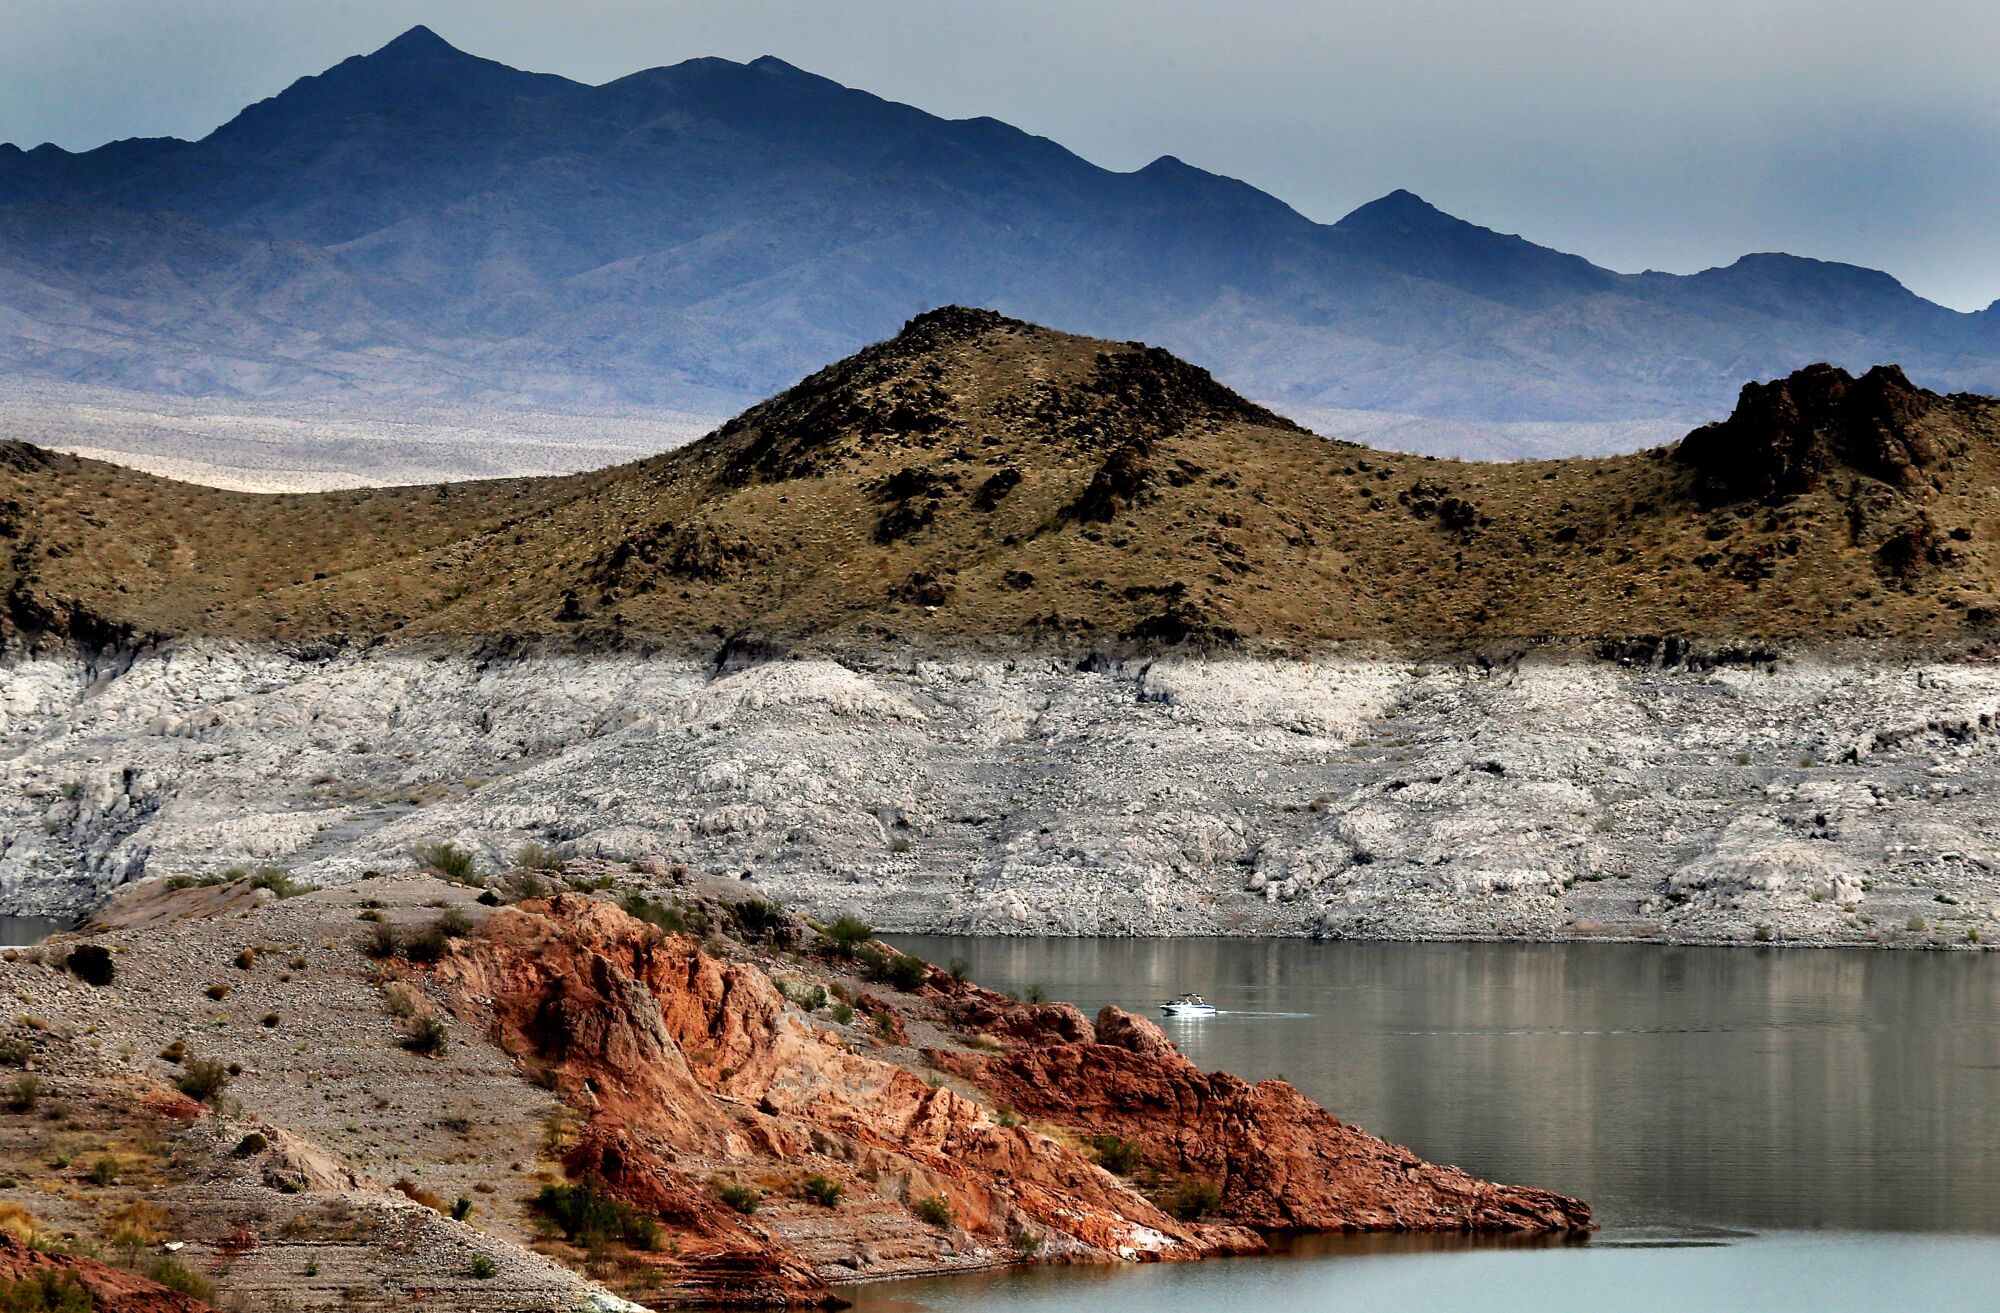 June 11: A boat navigates Lake Mead near hills with different colors